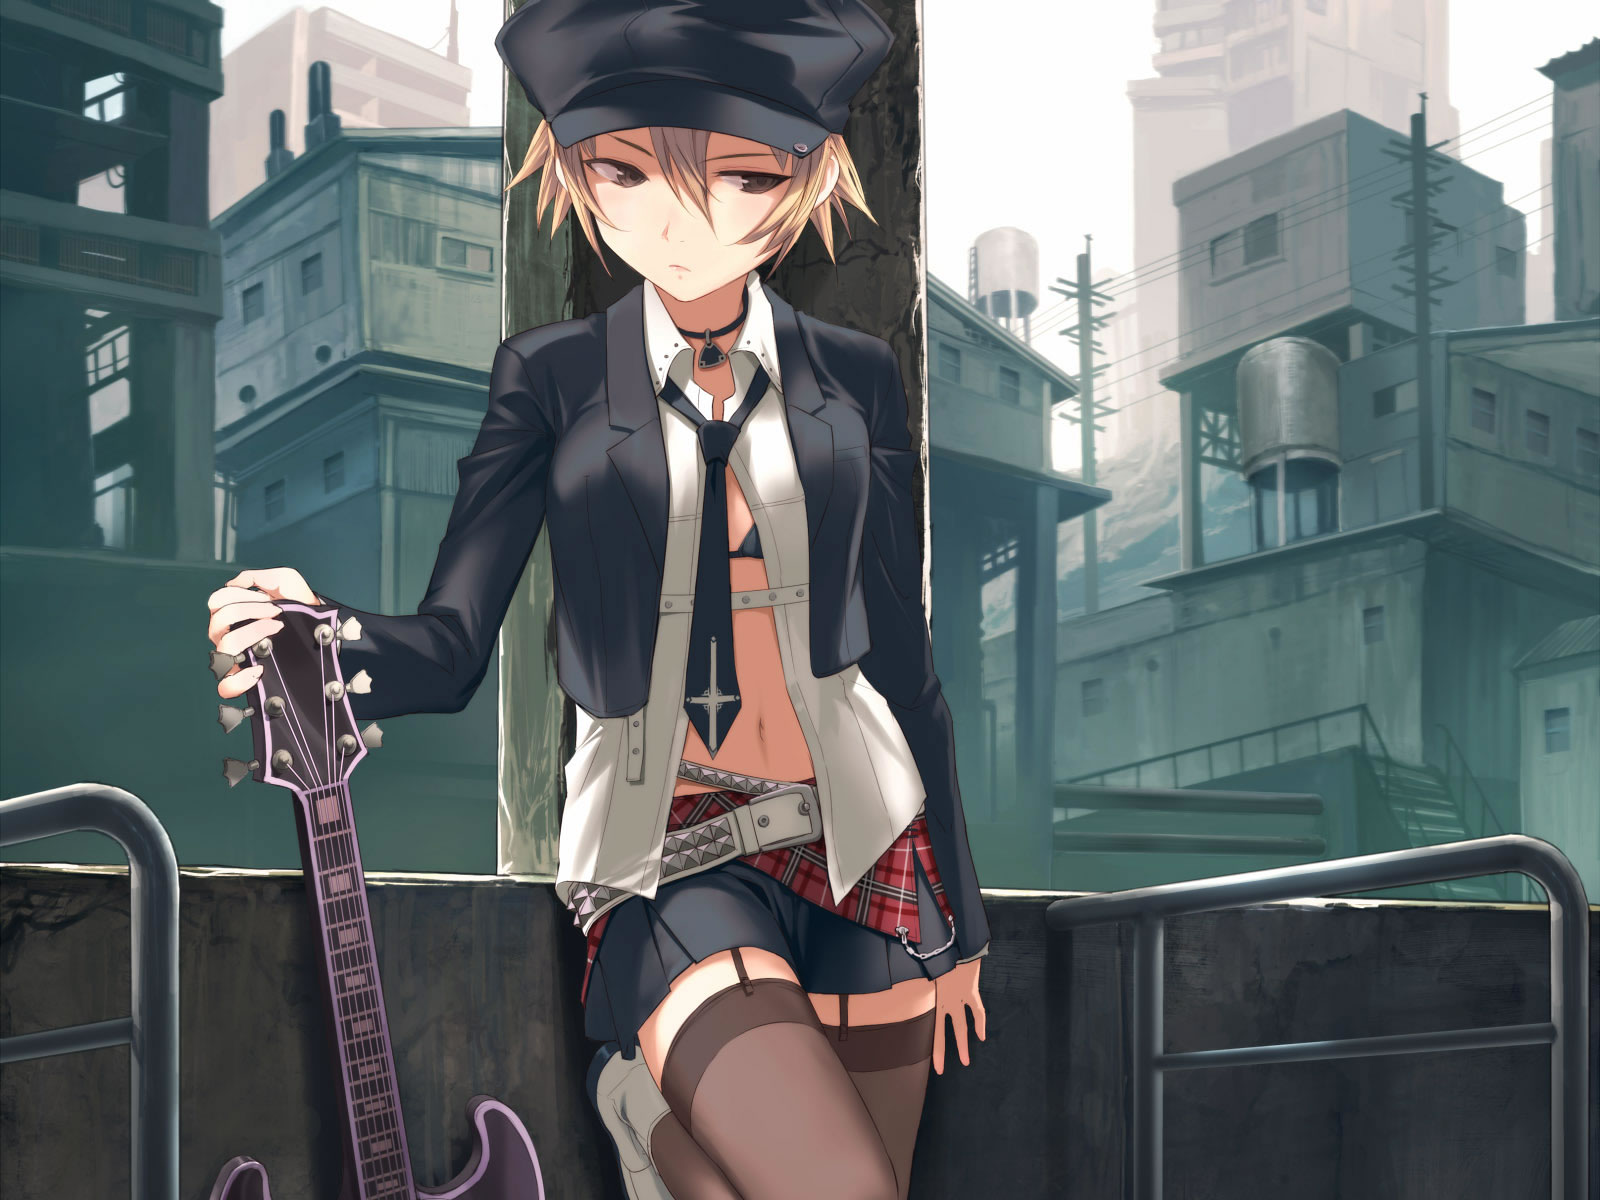 Sexy Girl With A Guitar Anime Wallpaper Image Featuring General